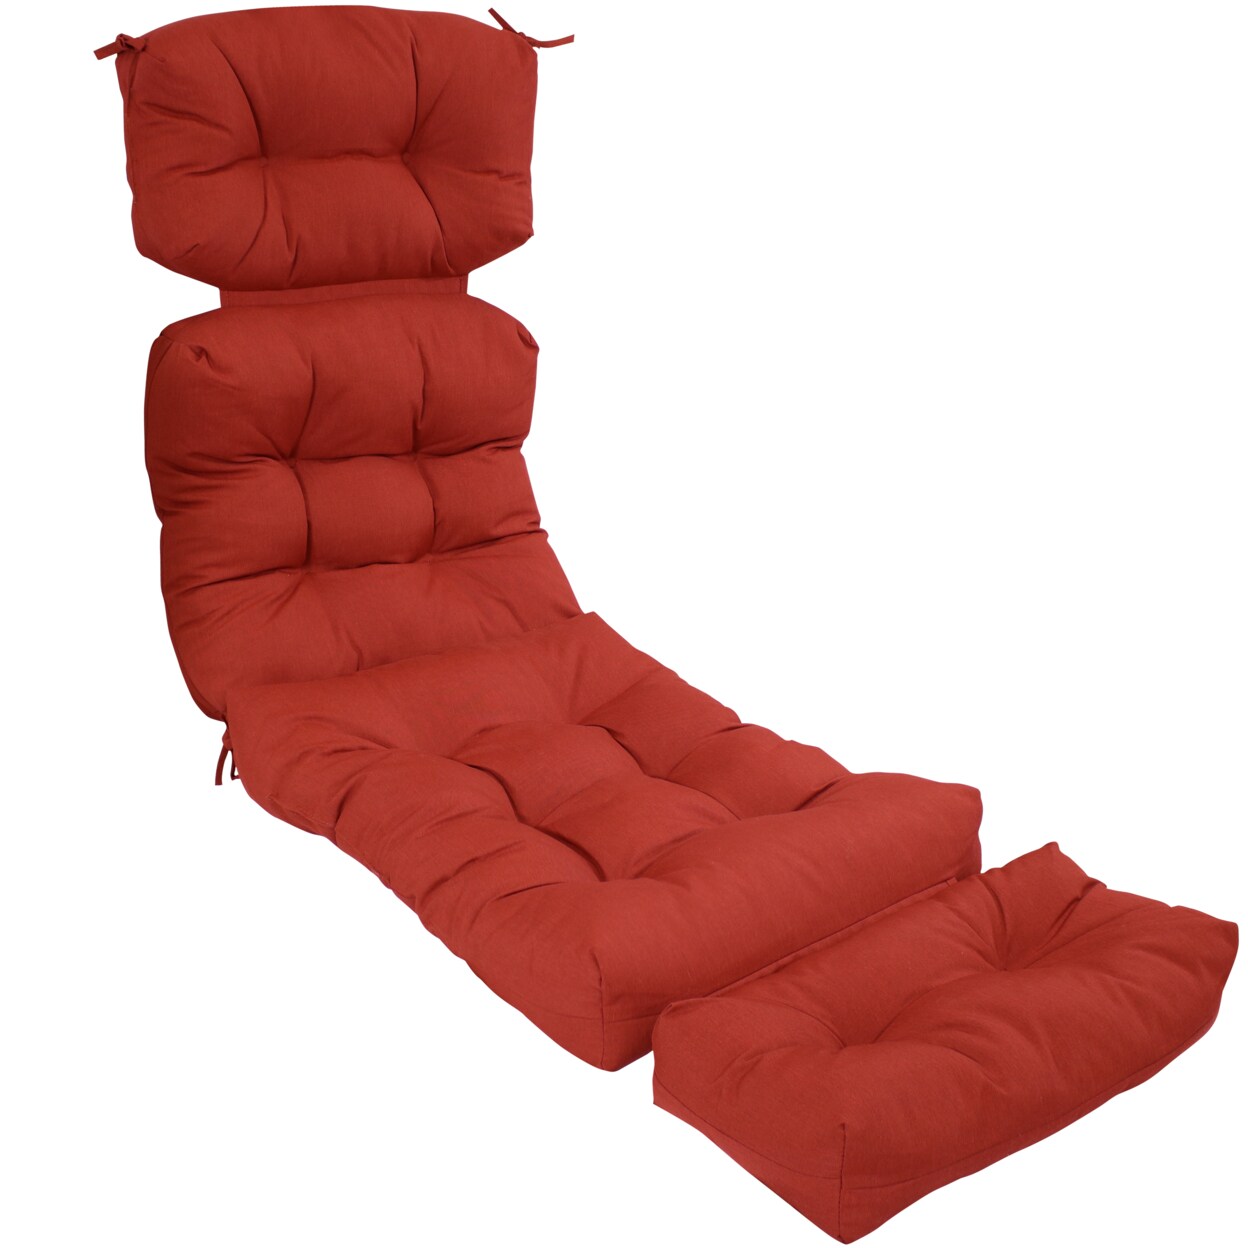 Sunnydaze   Indoor/Outdoor Olefin Tufted Chaise Lounge Chair Cushions - Red